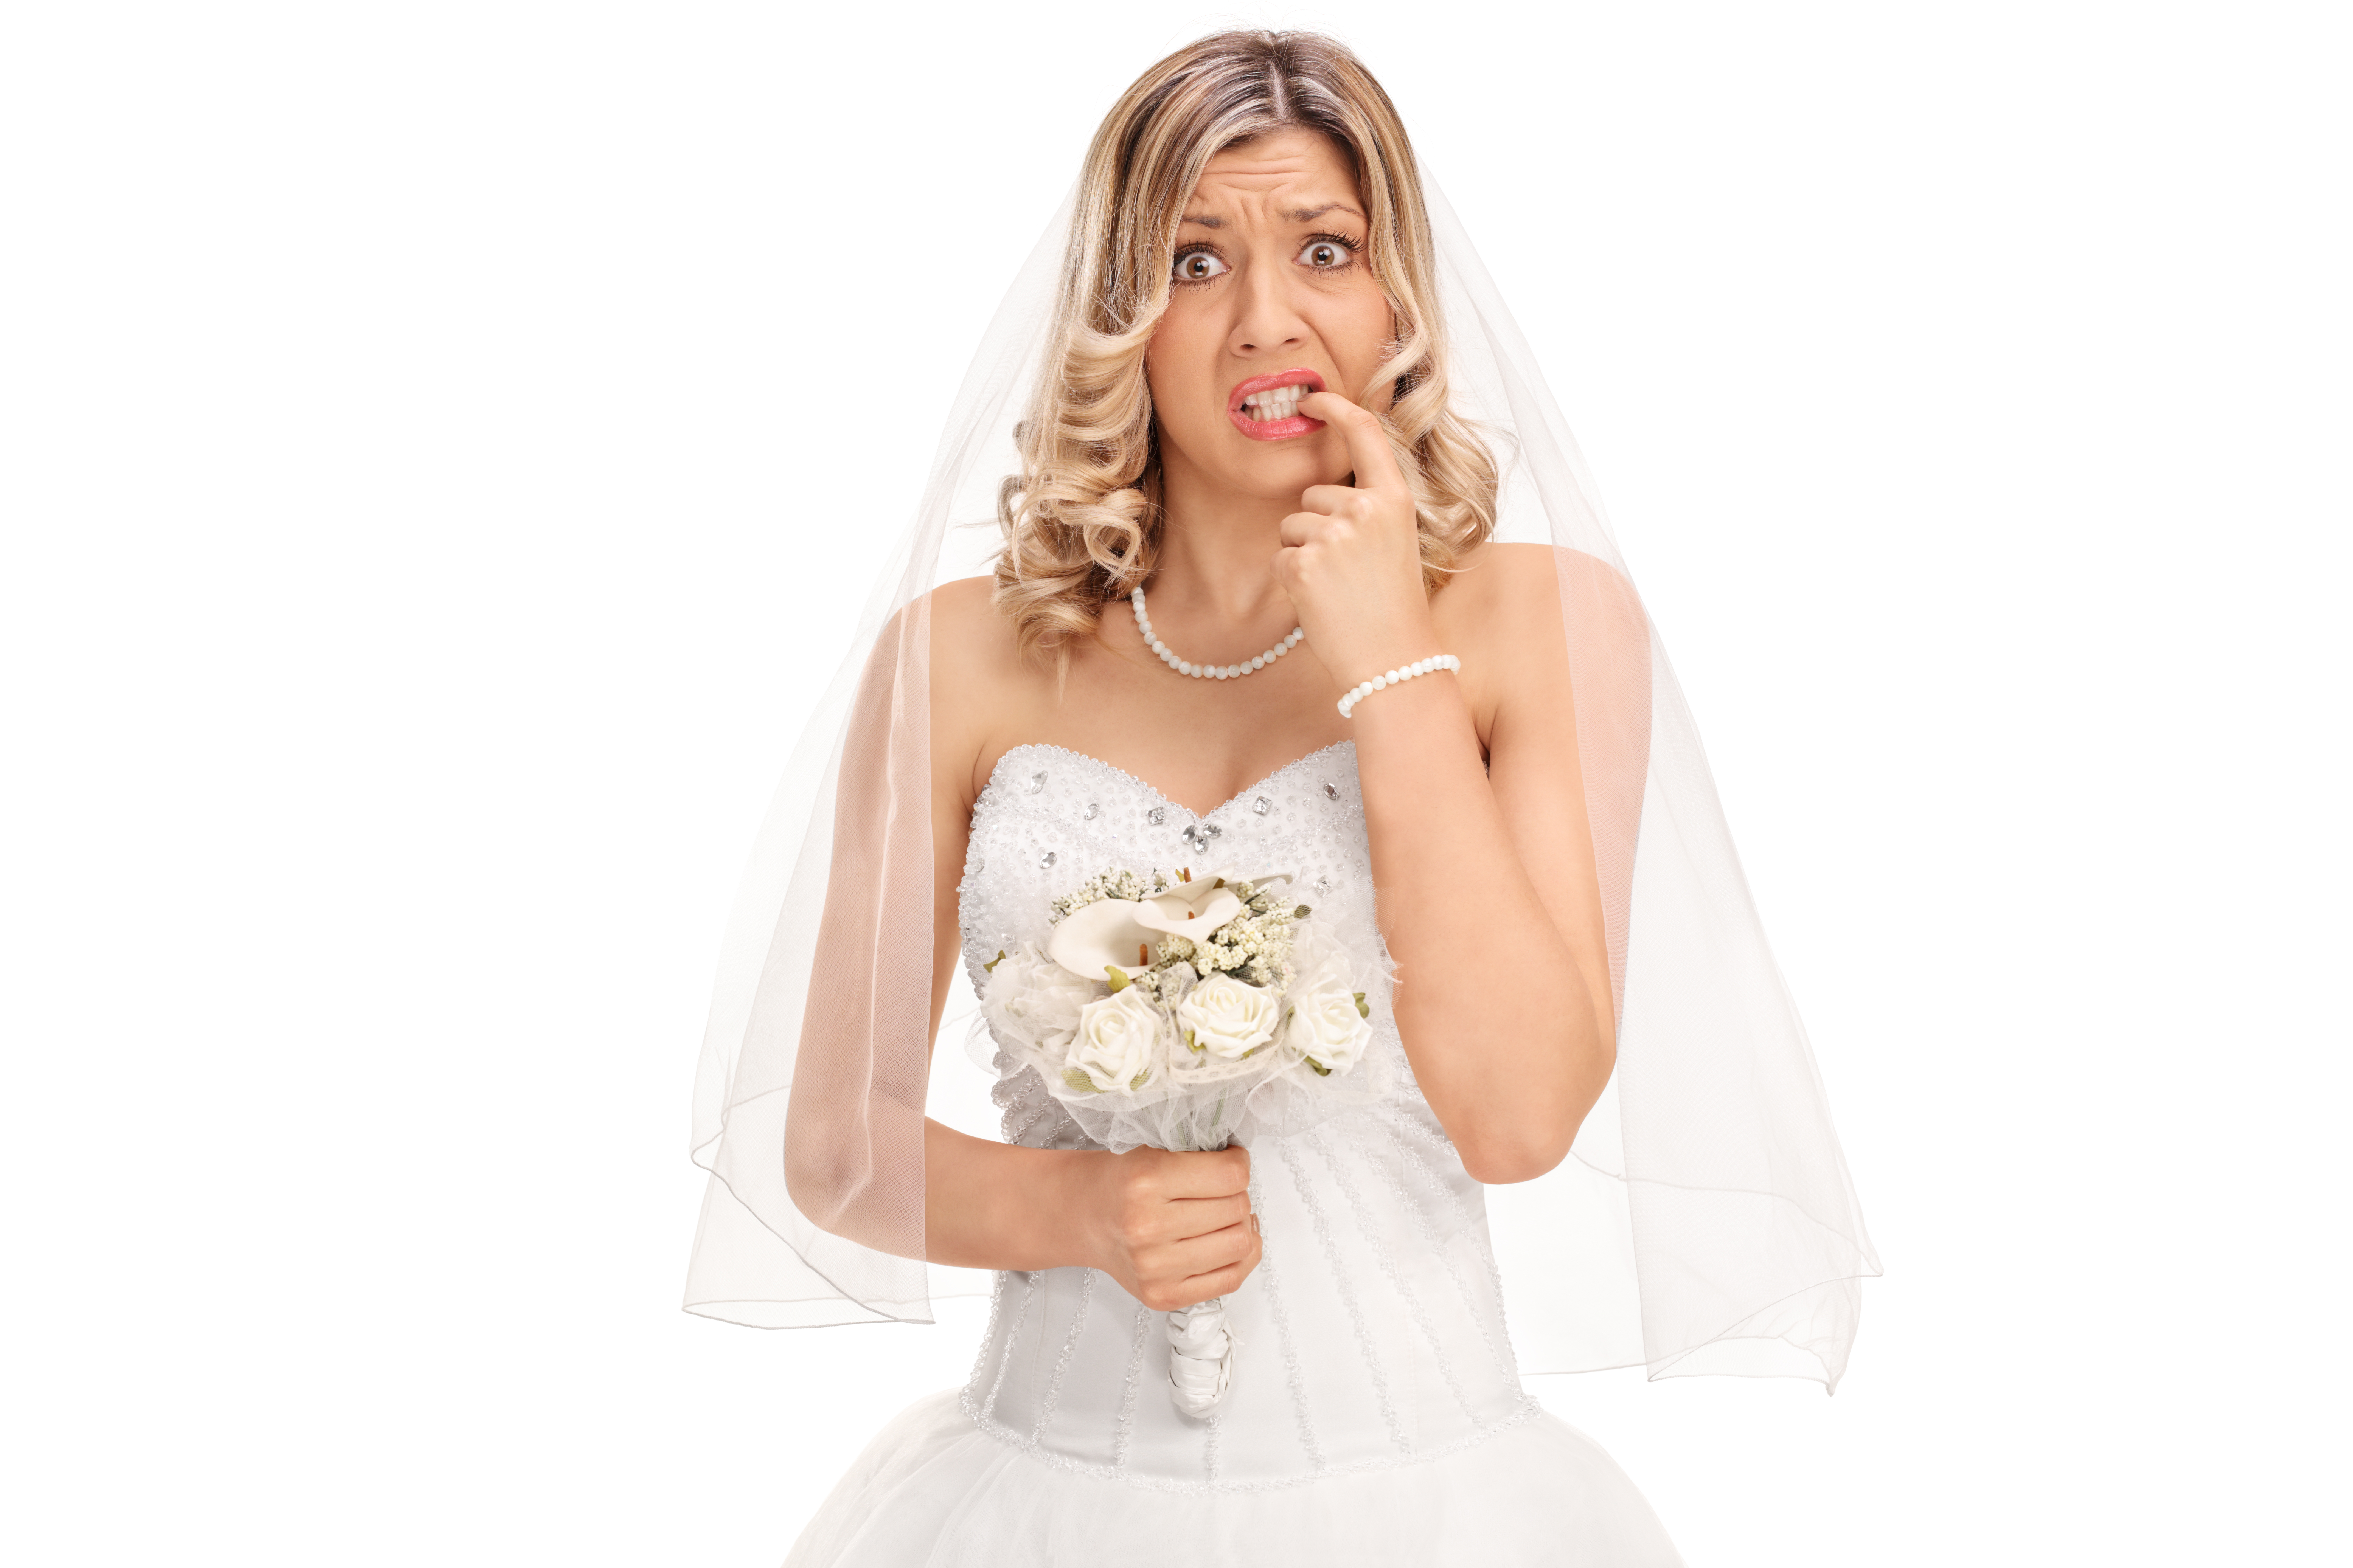 Nervous bride biting her nails | Source: Getty Images